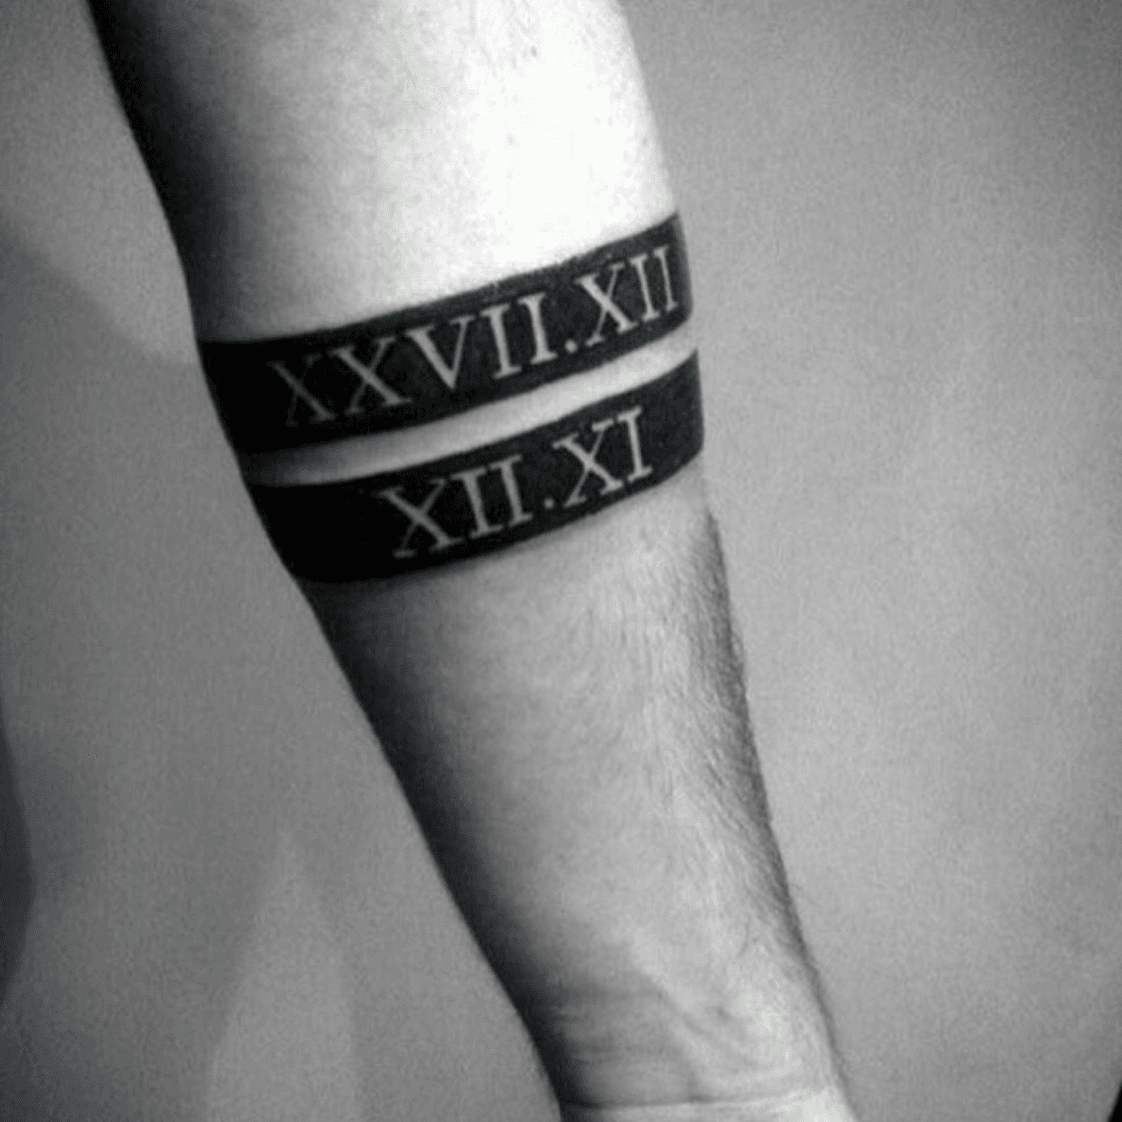 Roman numeral tattoo done on the inner forearm